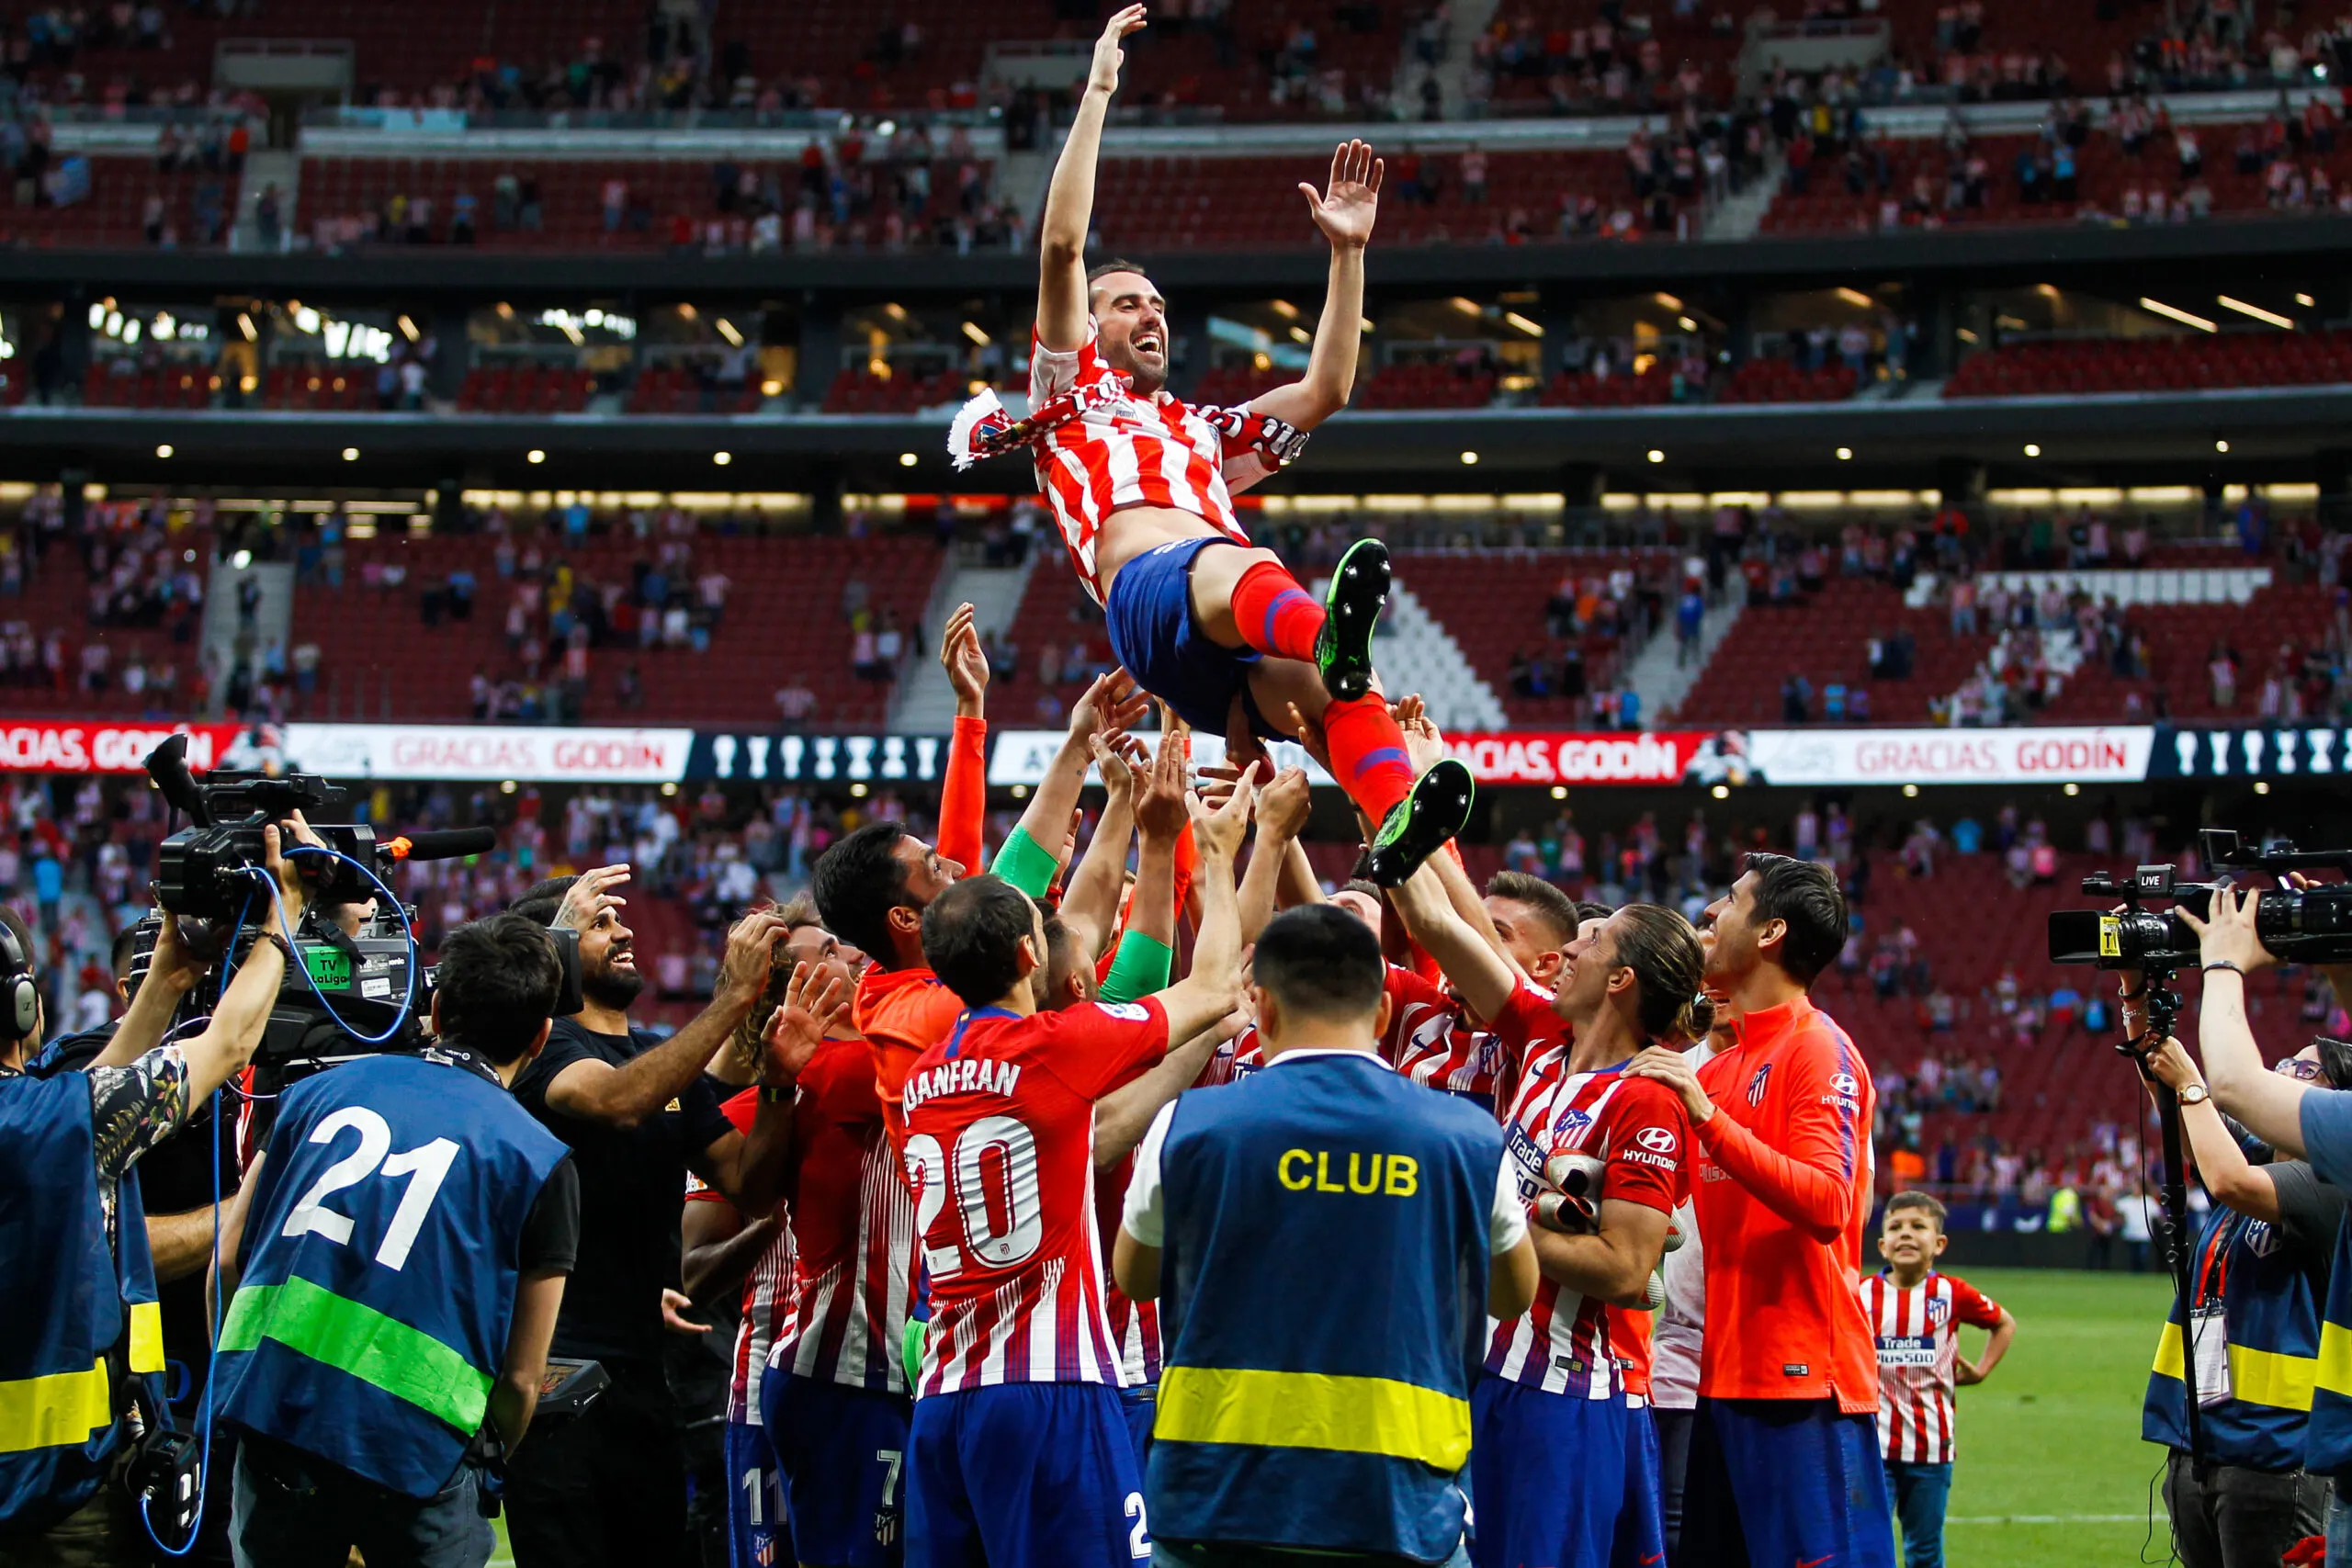 Diego Godin during the Liga match between Atletico and Sevilla on 12th May 2019